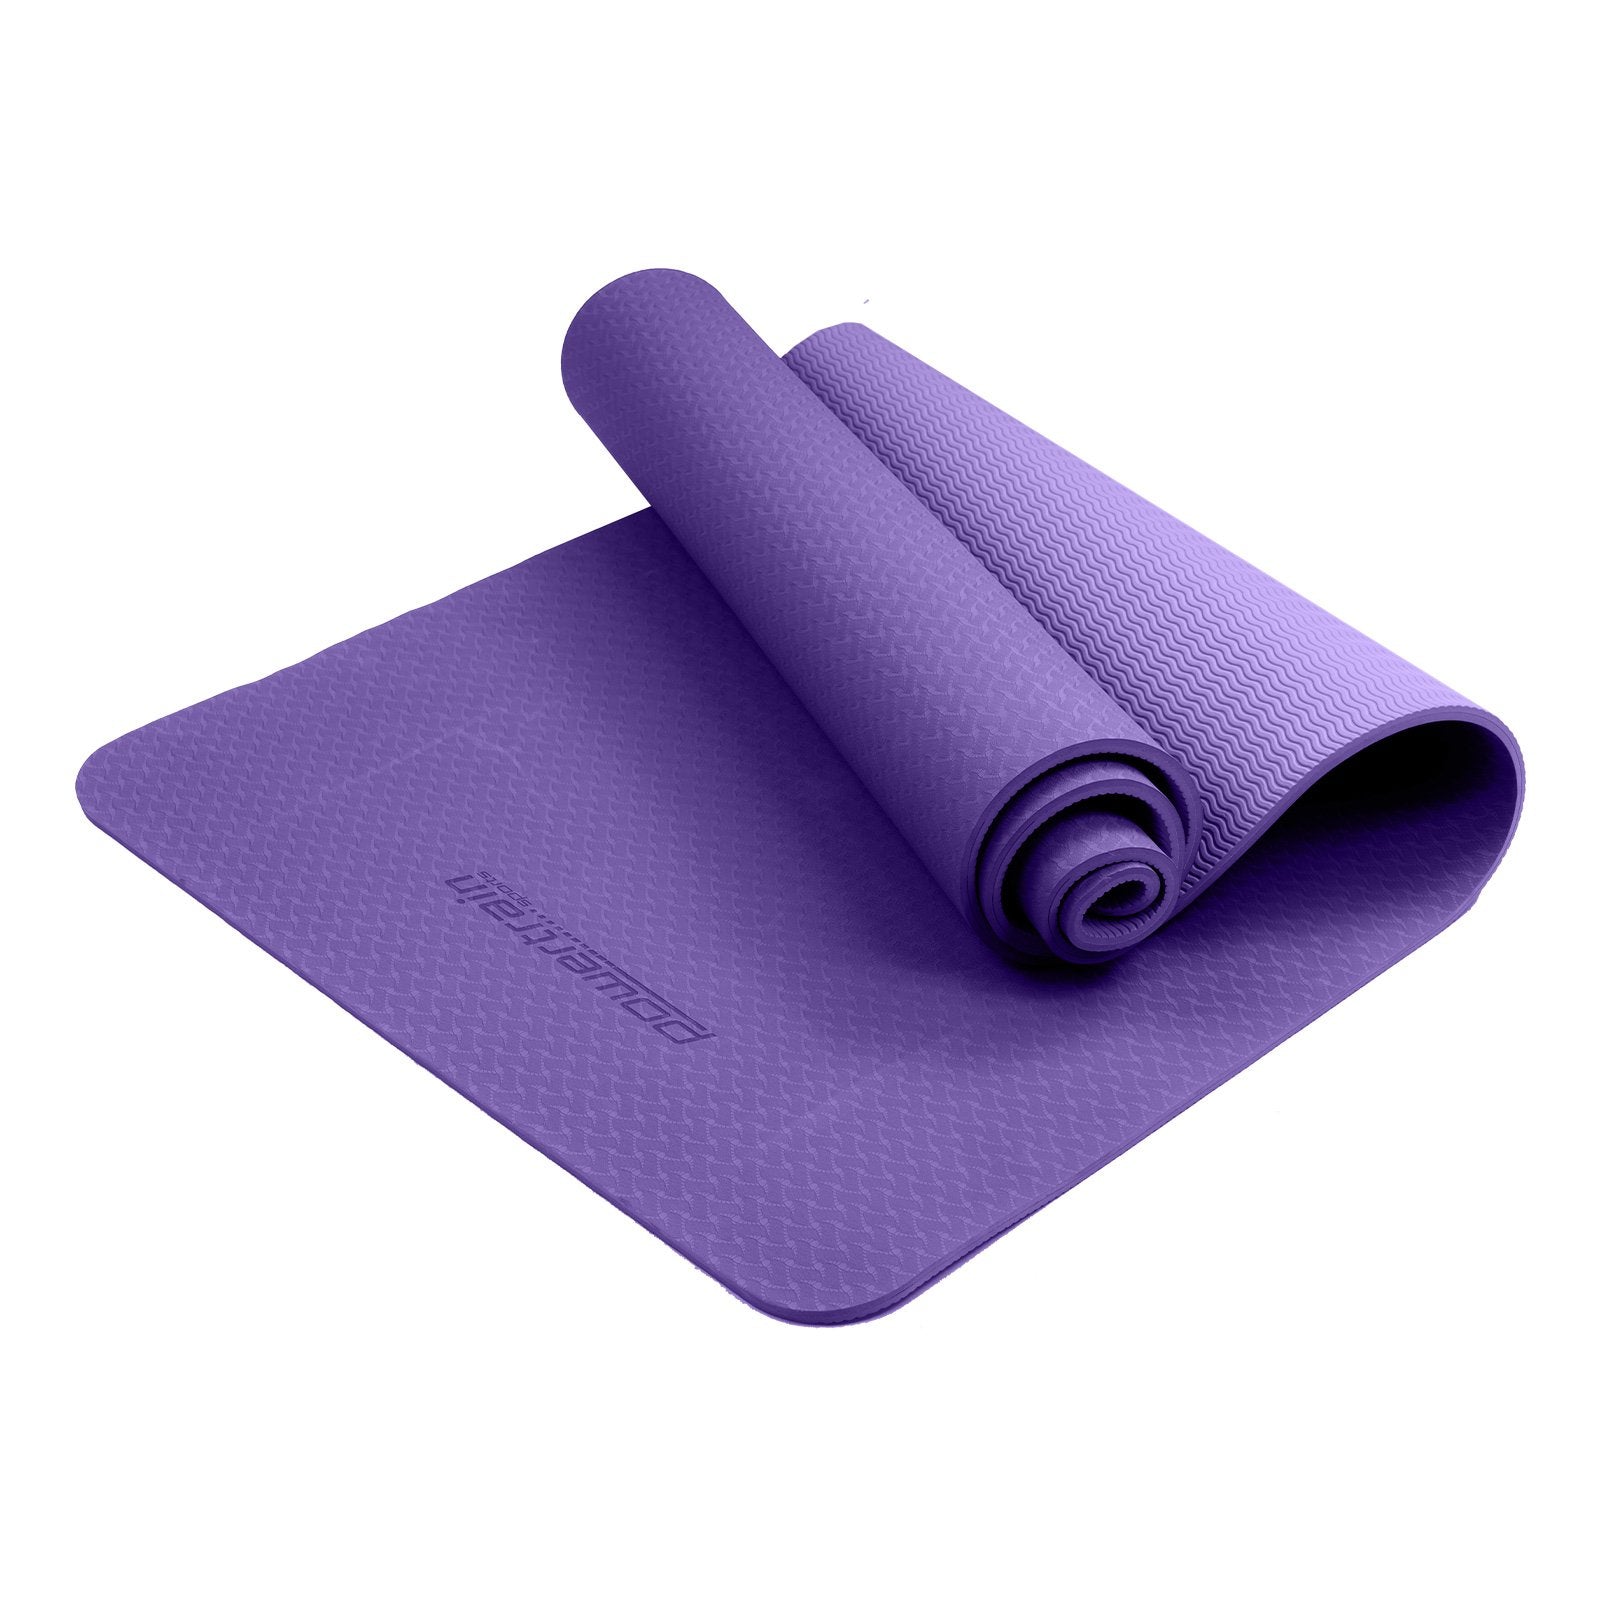 Eco-friendly Dual Layer 6mm Yoga Mat | Dark Lavender | Non-slip Surface And Carry Strap For Ultimate Comfort And Portability